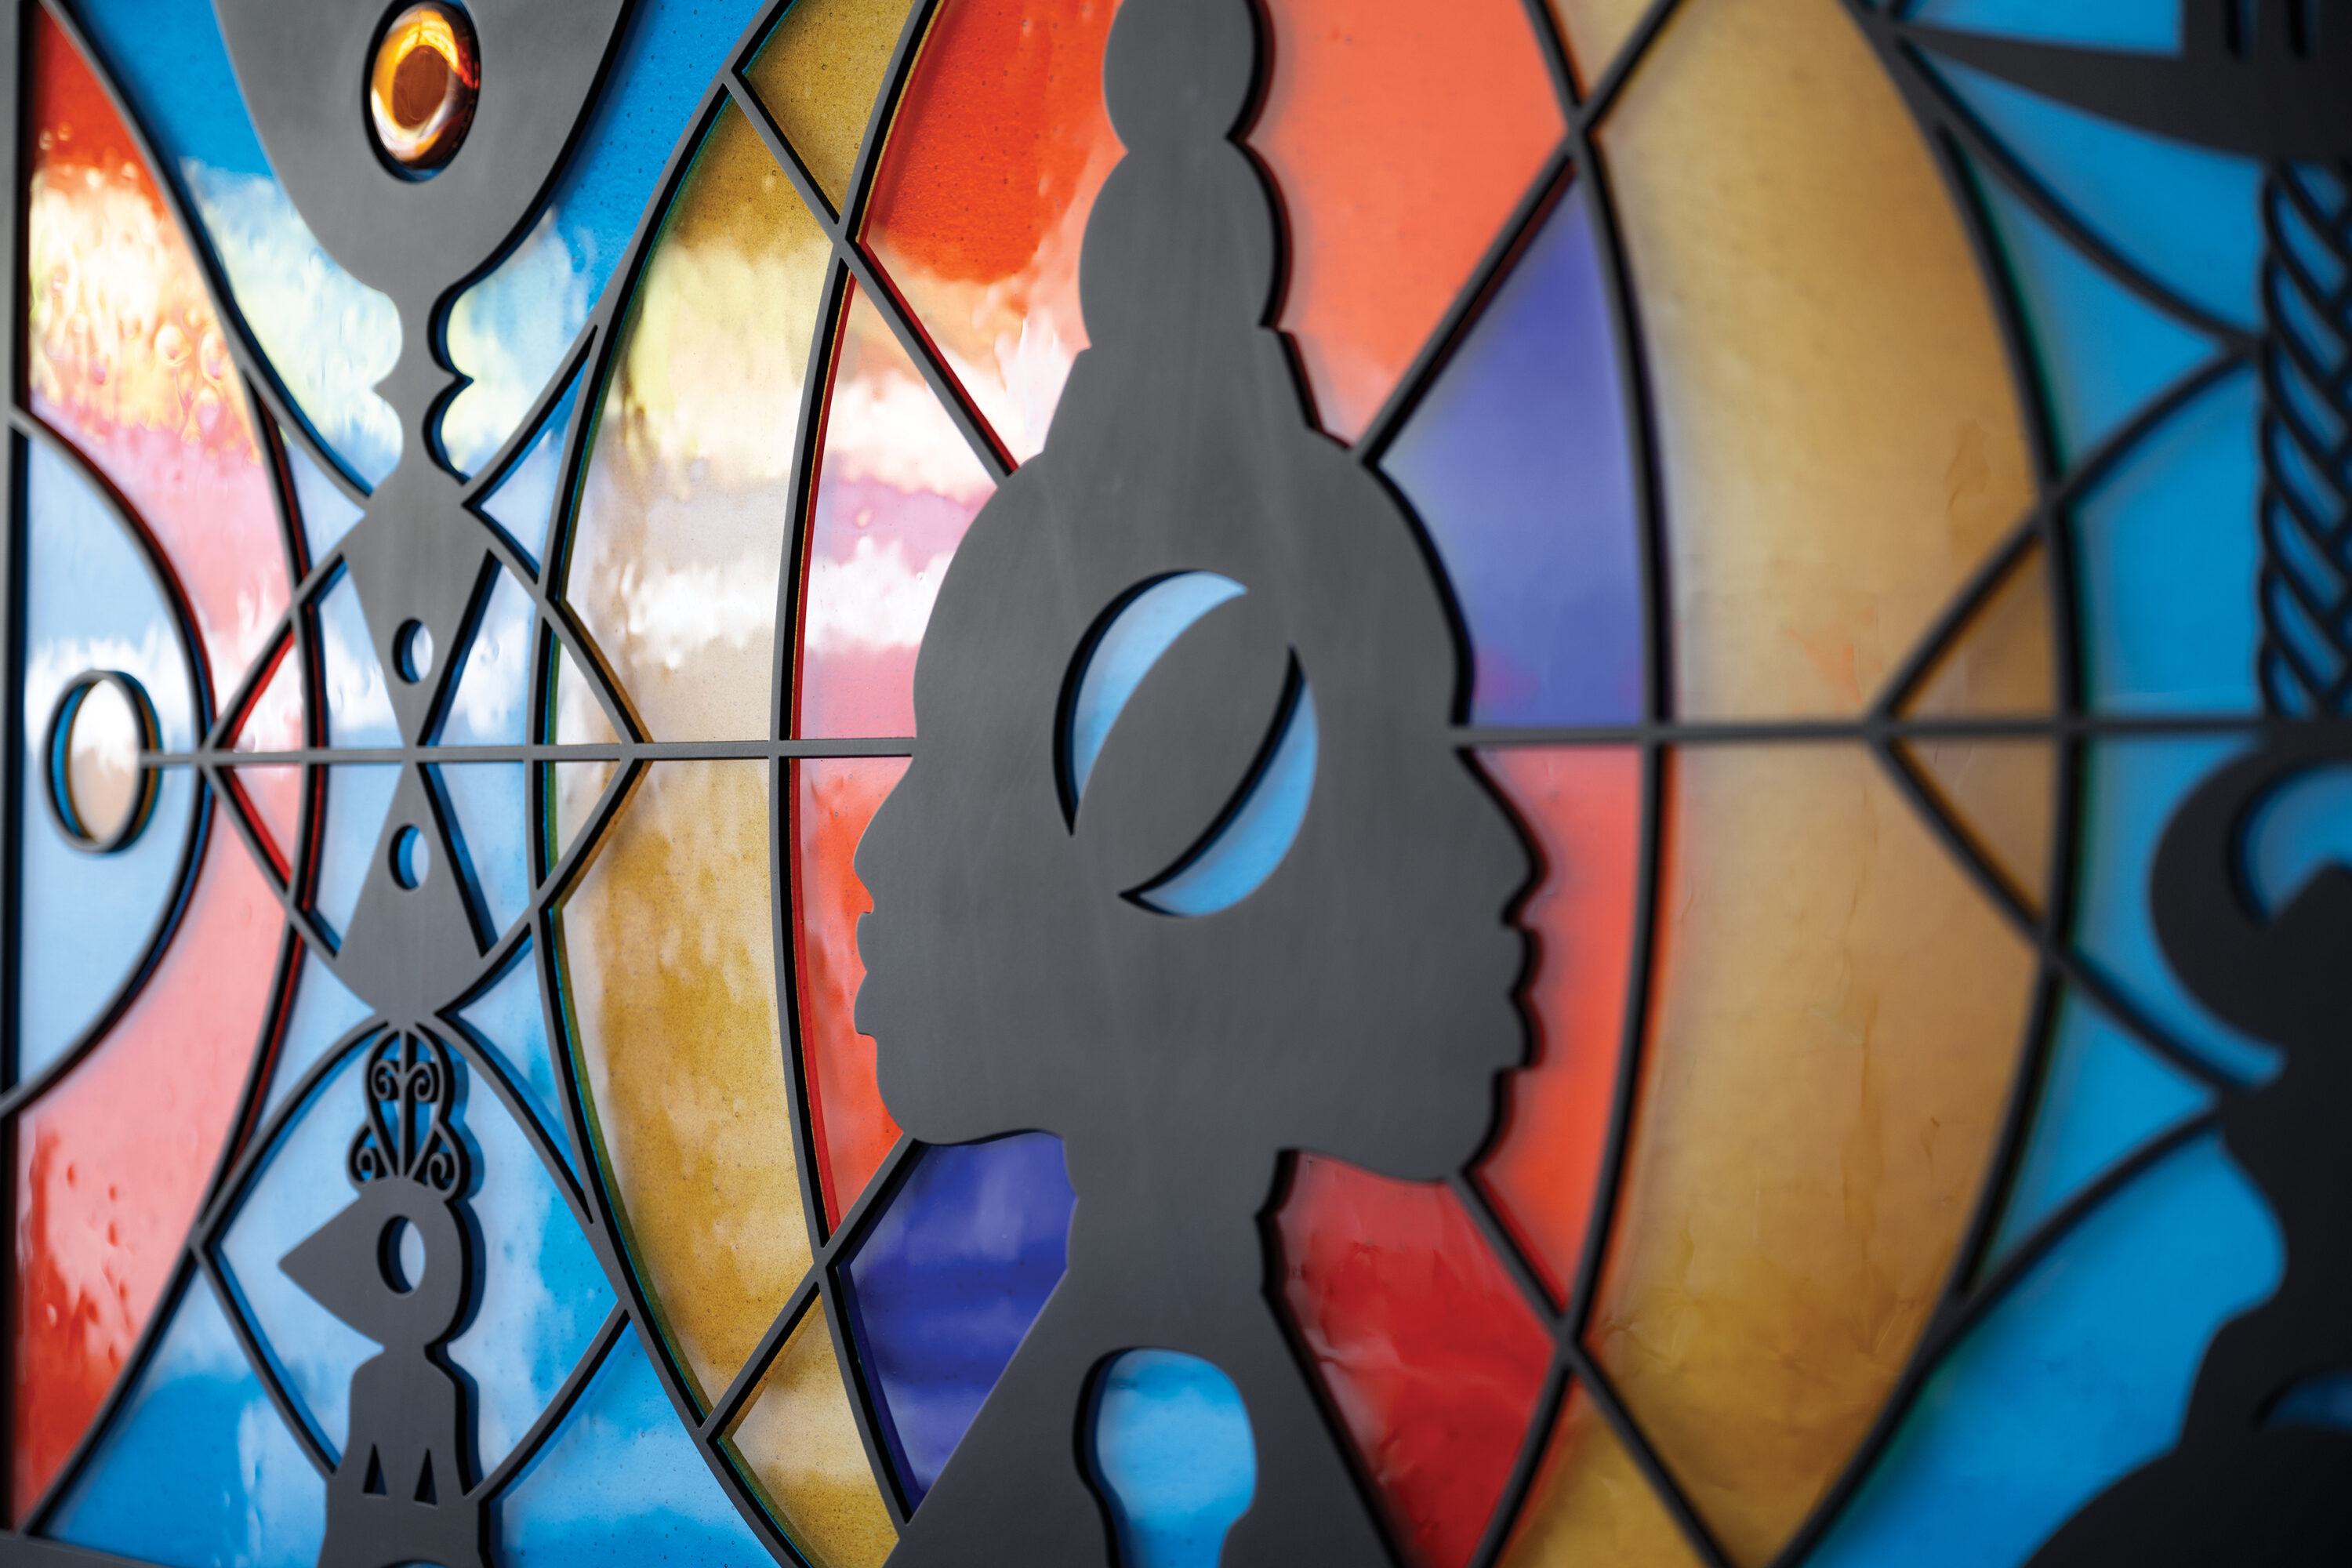 A sculpture hangs flat against the wall. It looks like a wide, stained glass window that can be lit from behind. There are two faces in profile in the center, positioned back-to-back, as if emerging from a line down the center of the piece. They are made out of black metal, as are several totem-like designs positioned in front of bright orange, blue-green, and yellow abstract shapes. The abstract shapes are made of fused glass.